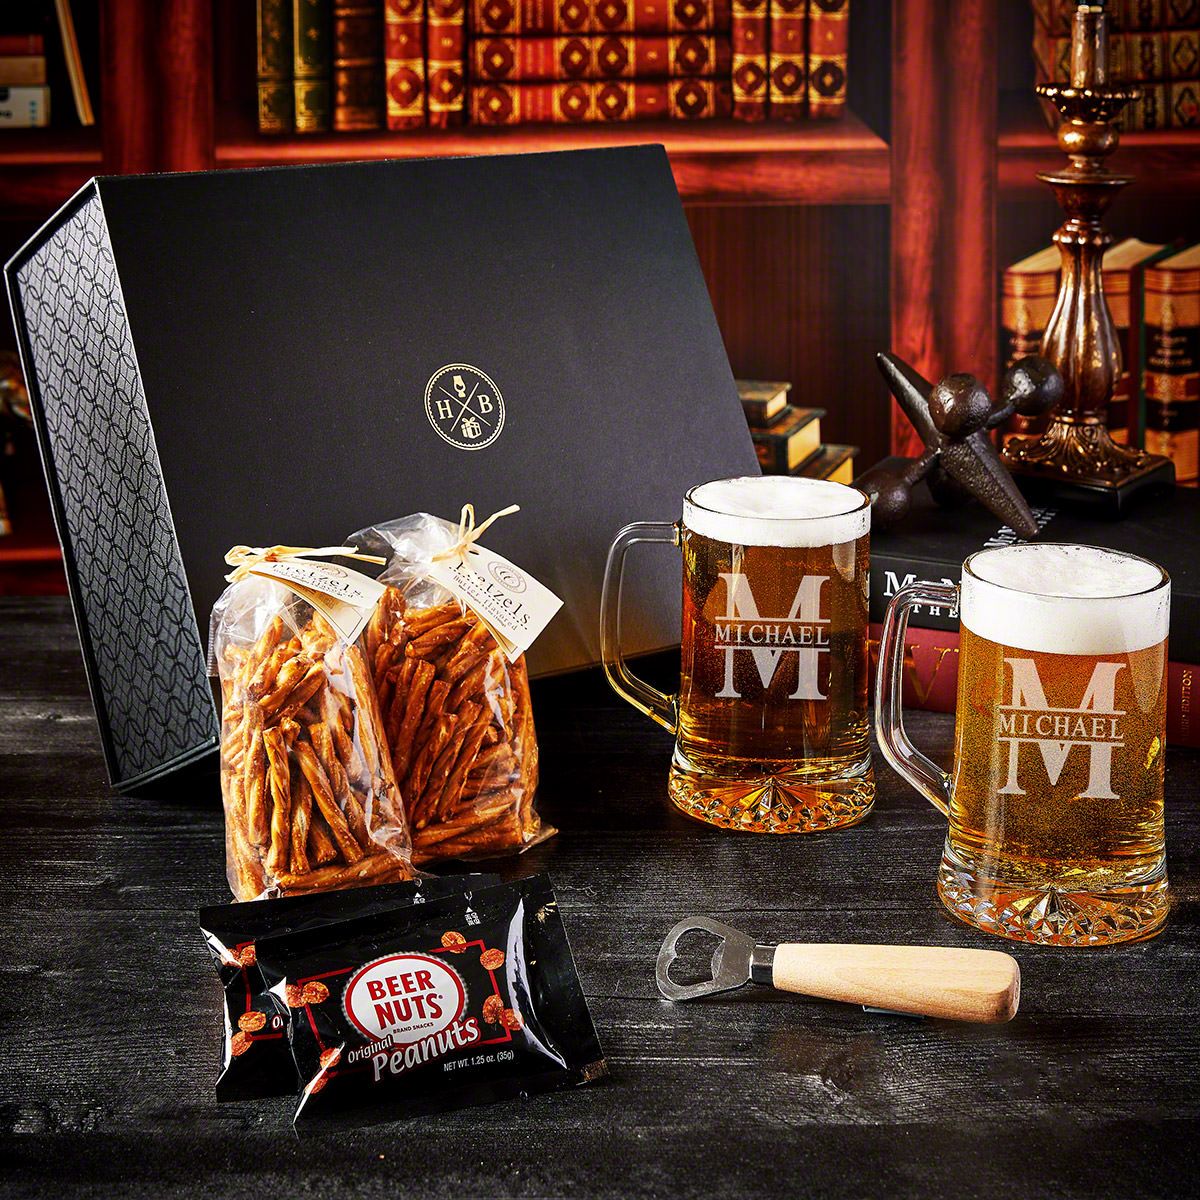 https://images.homewetbar.com/media/catalog/product/o/a/oakmont-personalized-luxury-gifts-for-beer-lovers-7-pc-p_10120.jpg?store=default&image-type=image